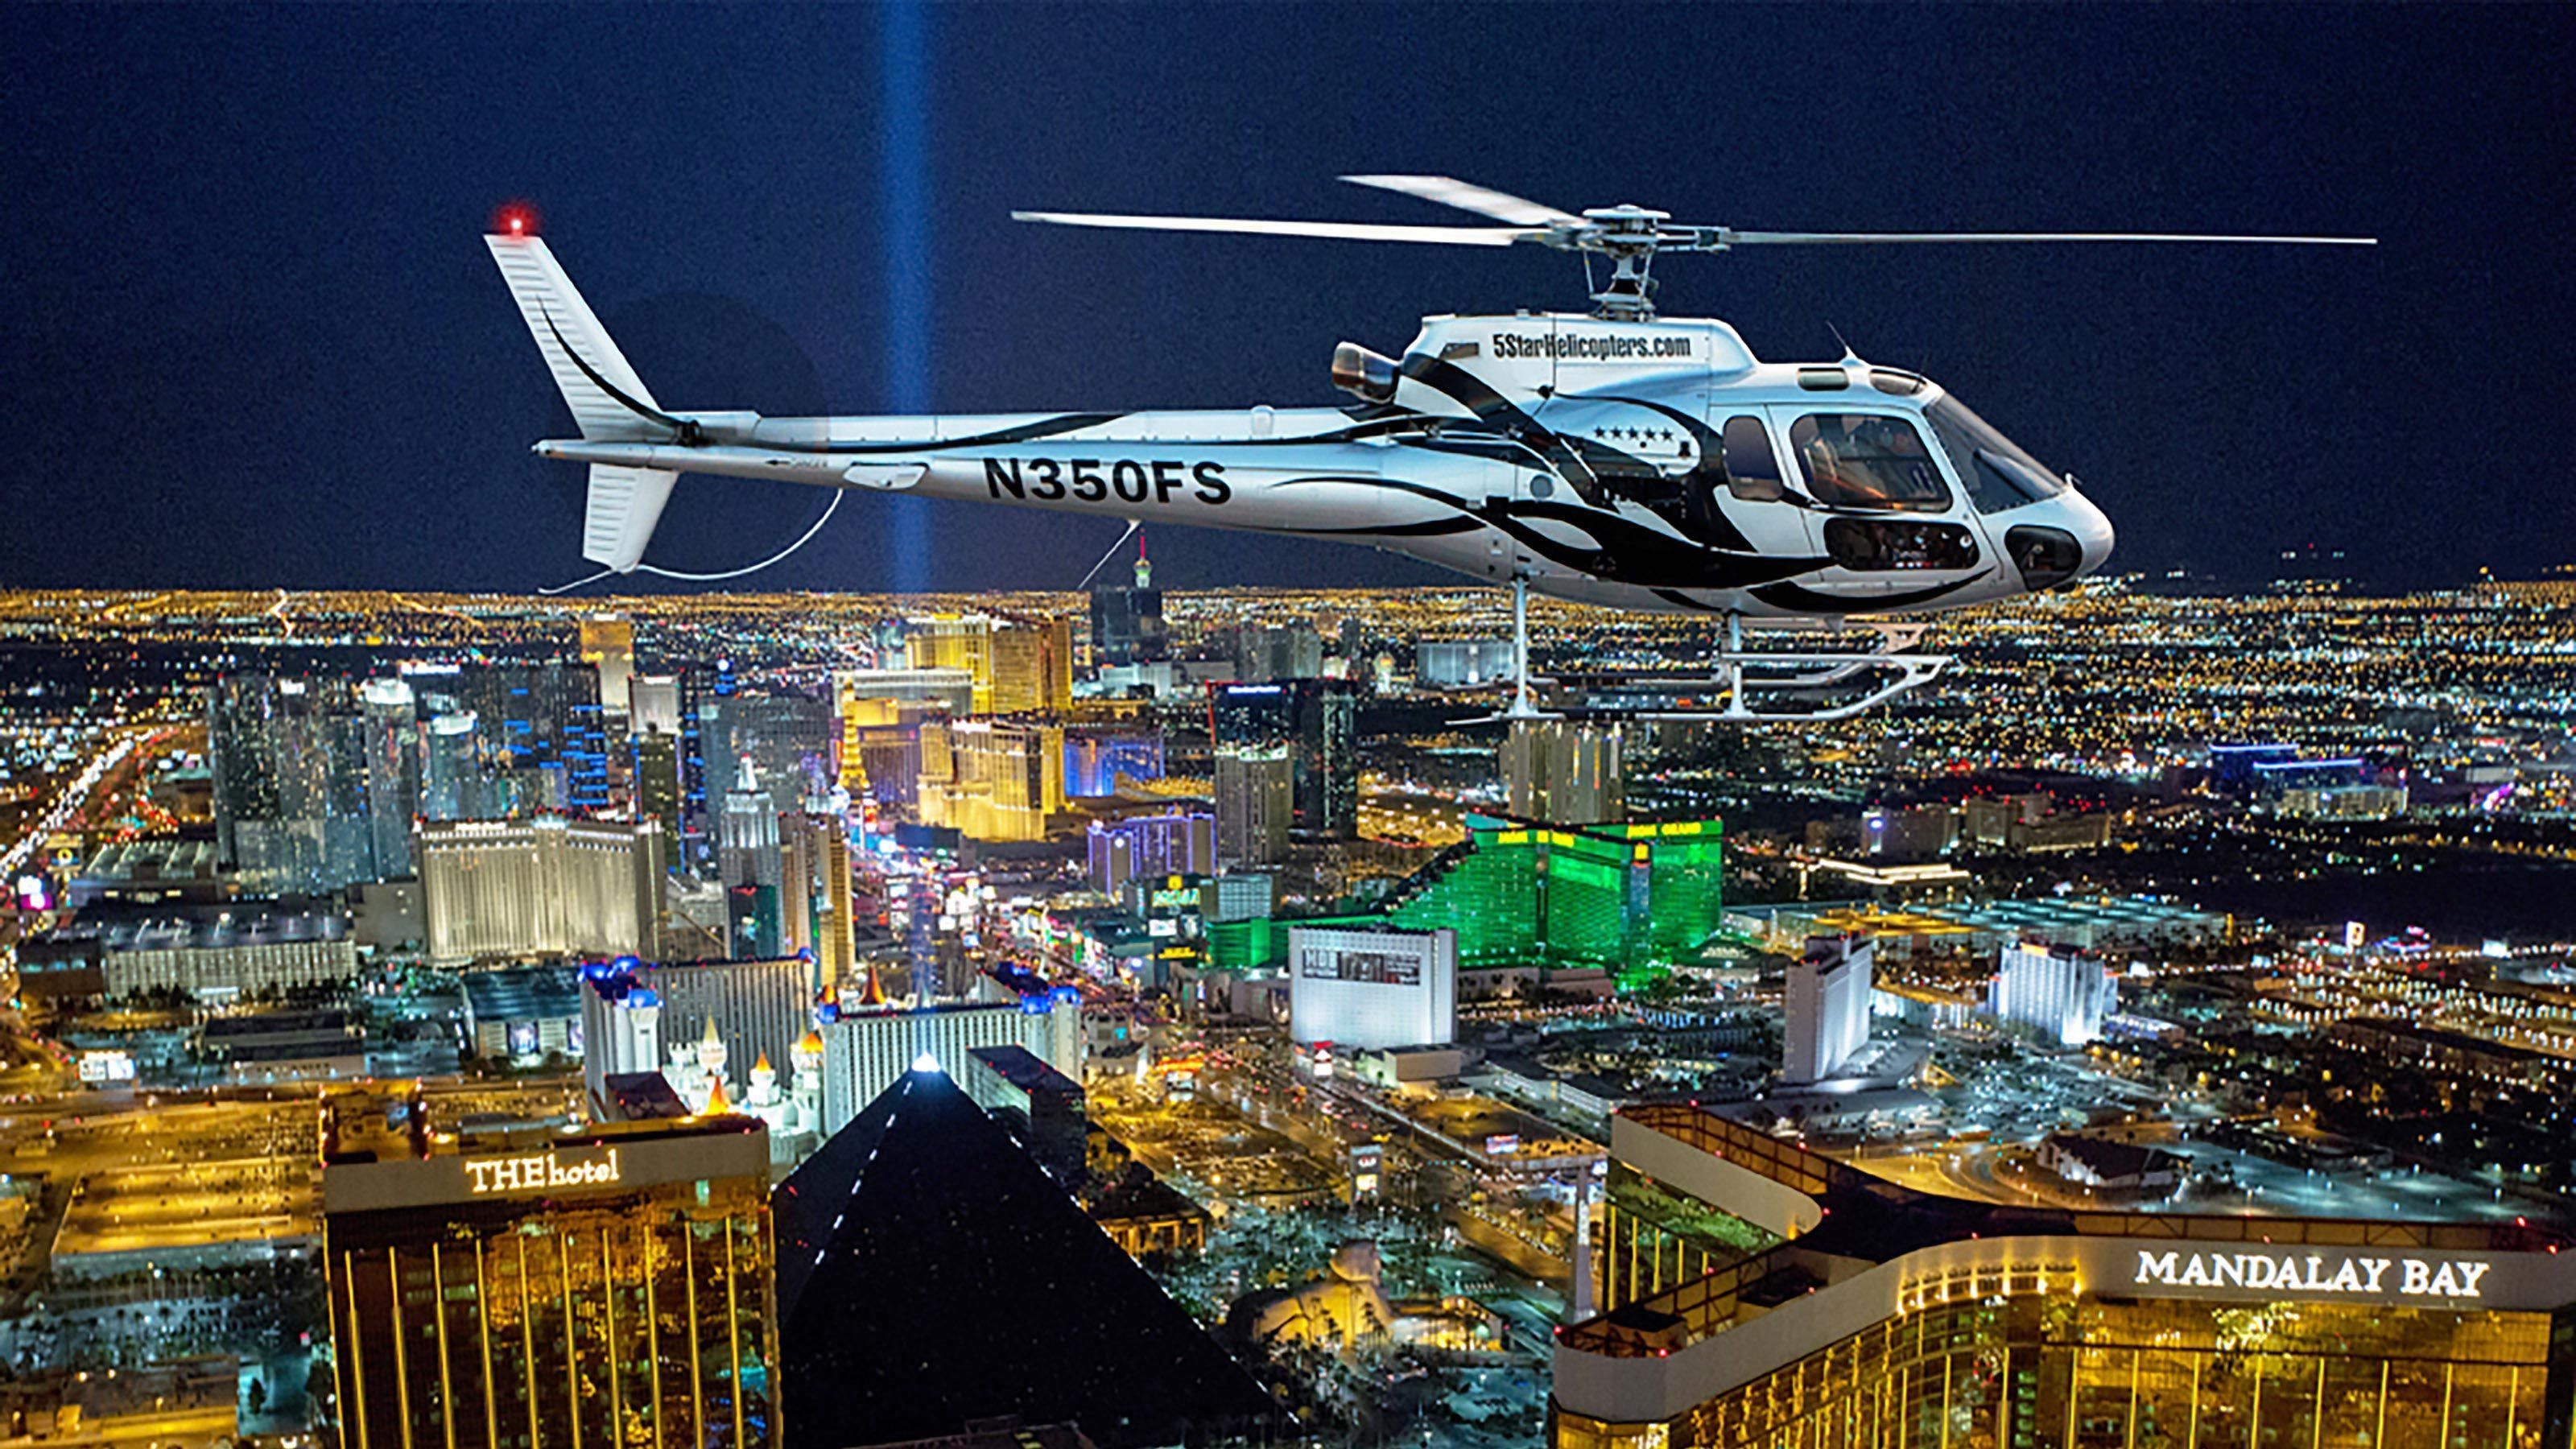 vegas helicopter trips